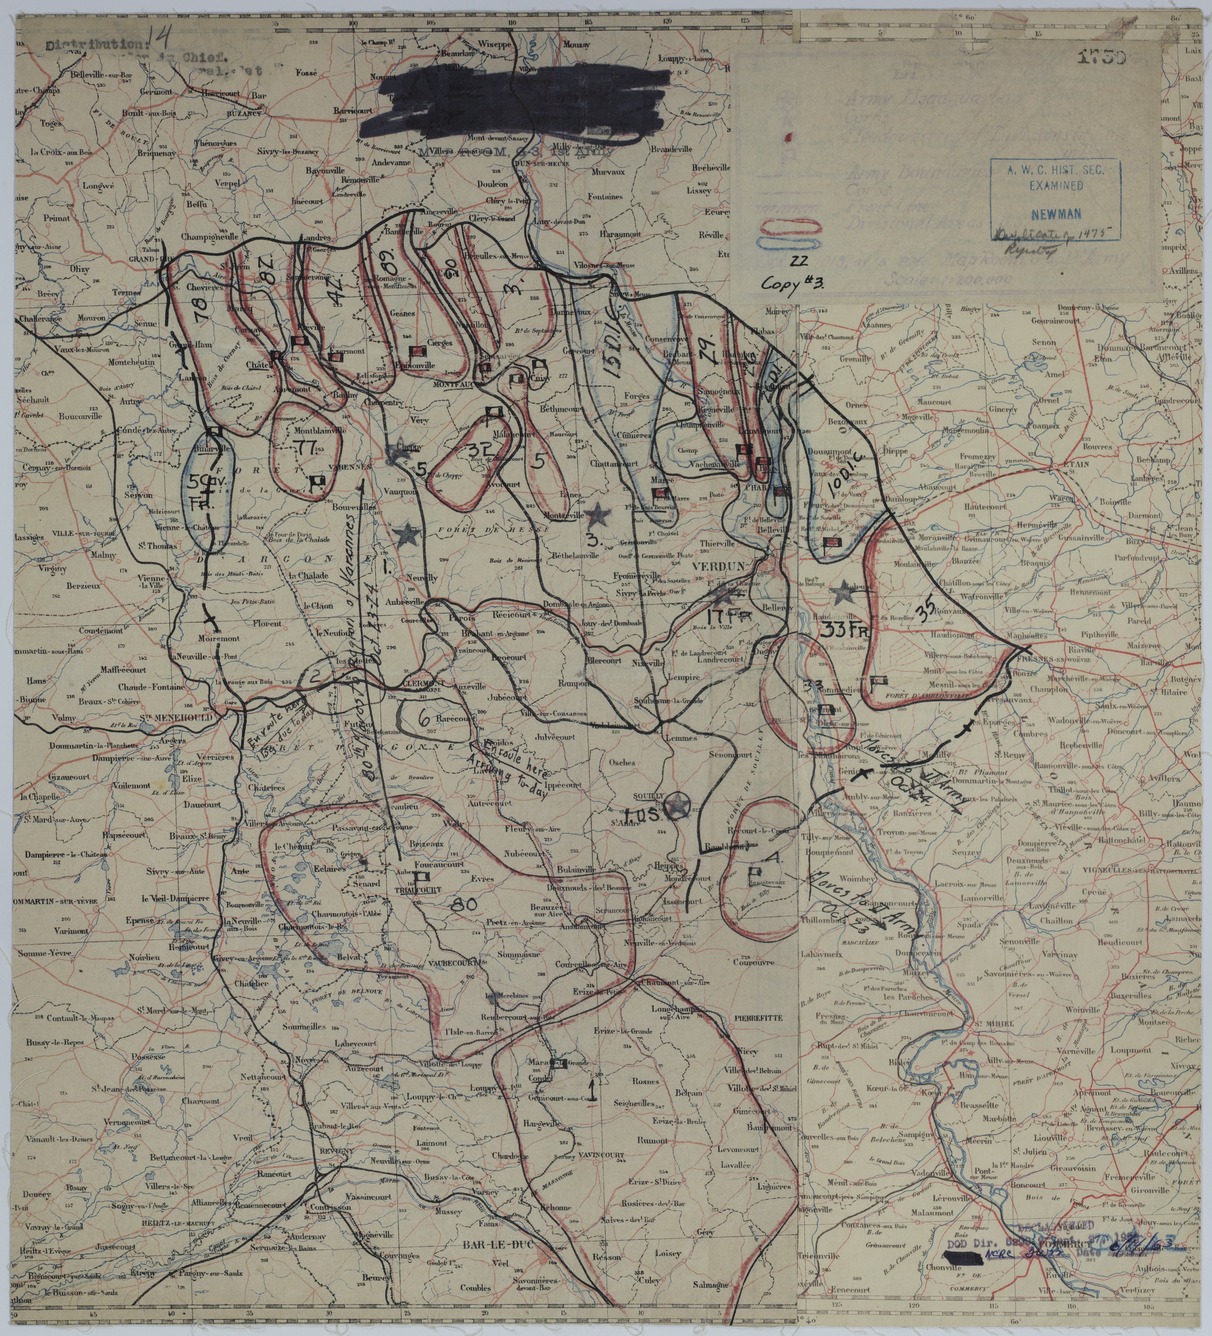 Map of Divisional Positions on October 22, 1918